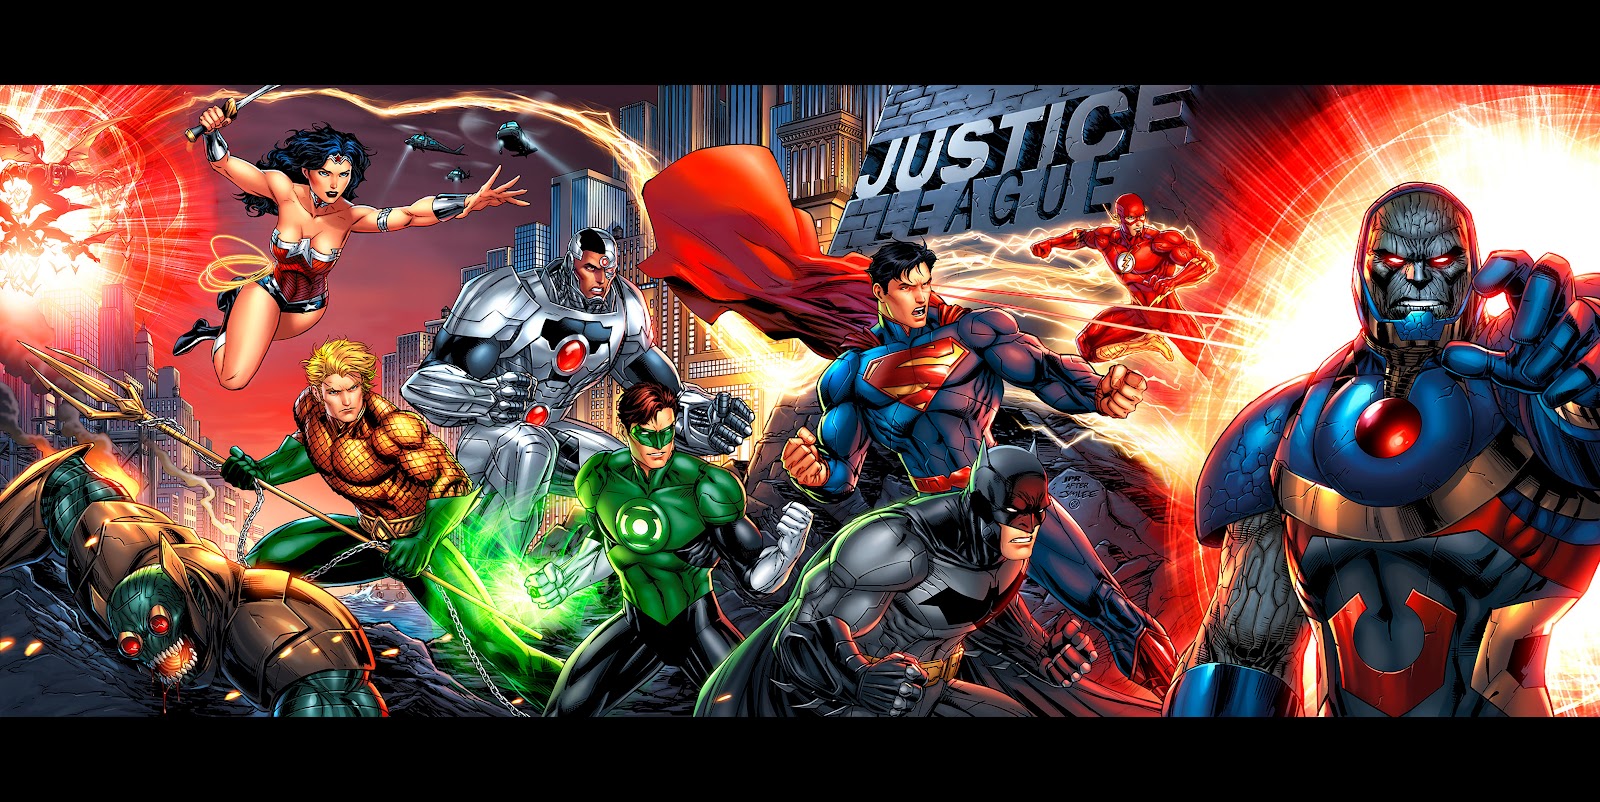 The Wallpapers of Superman and the New 52 Justice League above are by 1600x802